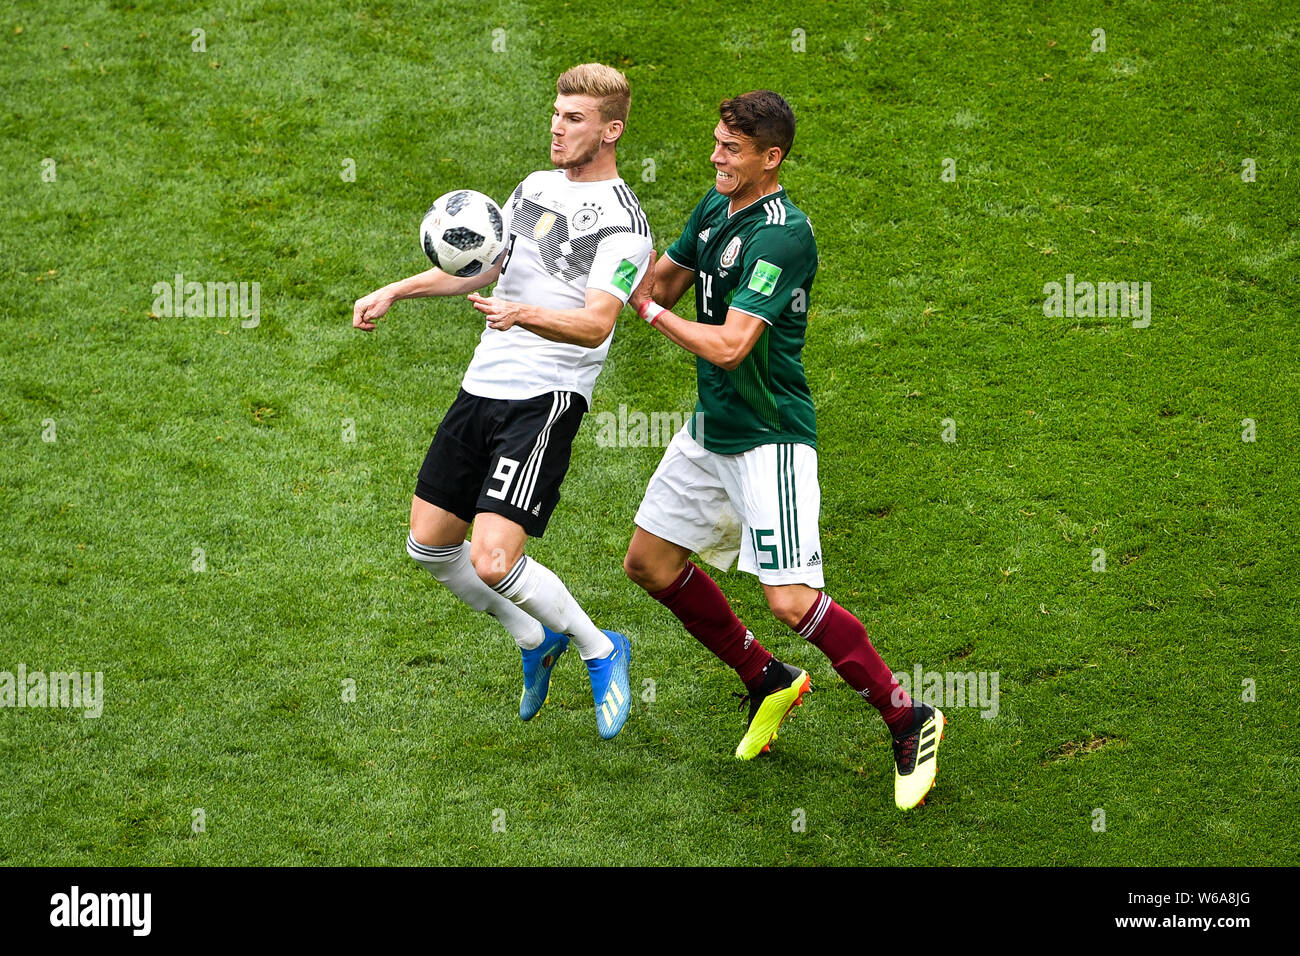 Hector Moreno of Mexico, right, challenges Timo Werner of Germany in their Group F match during the 2018 FIFA World Cup in Moscow, Russia, 17 June 201 Stock Photo